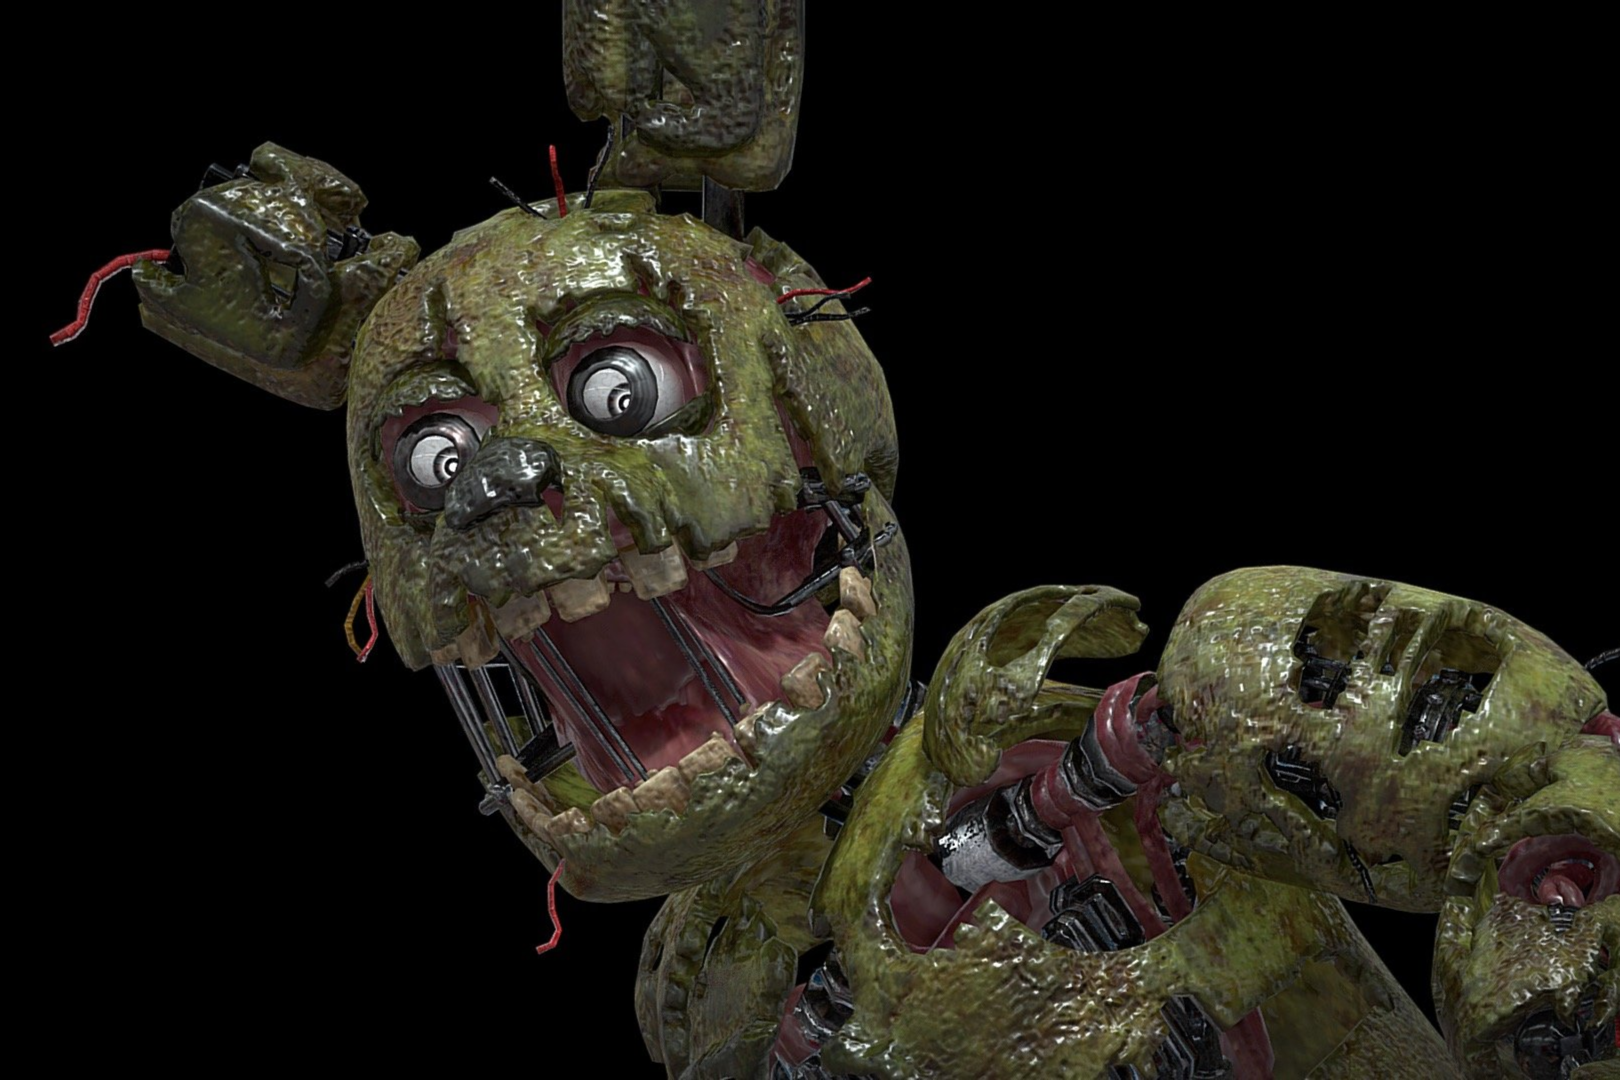 Springtrap is infamously difficult in FNAF AR. How long did it take from his release to the first time someone beat him?